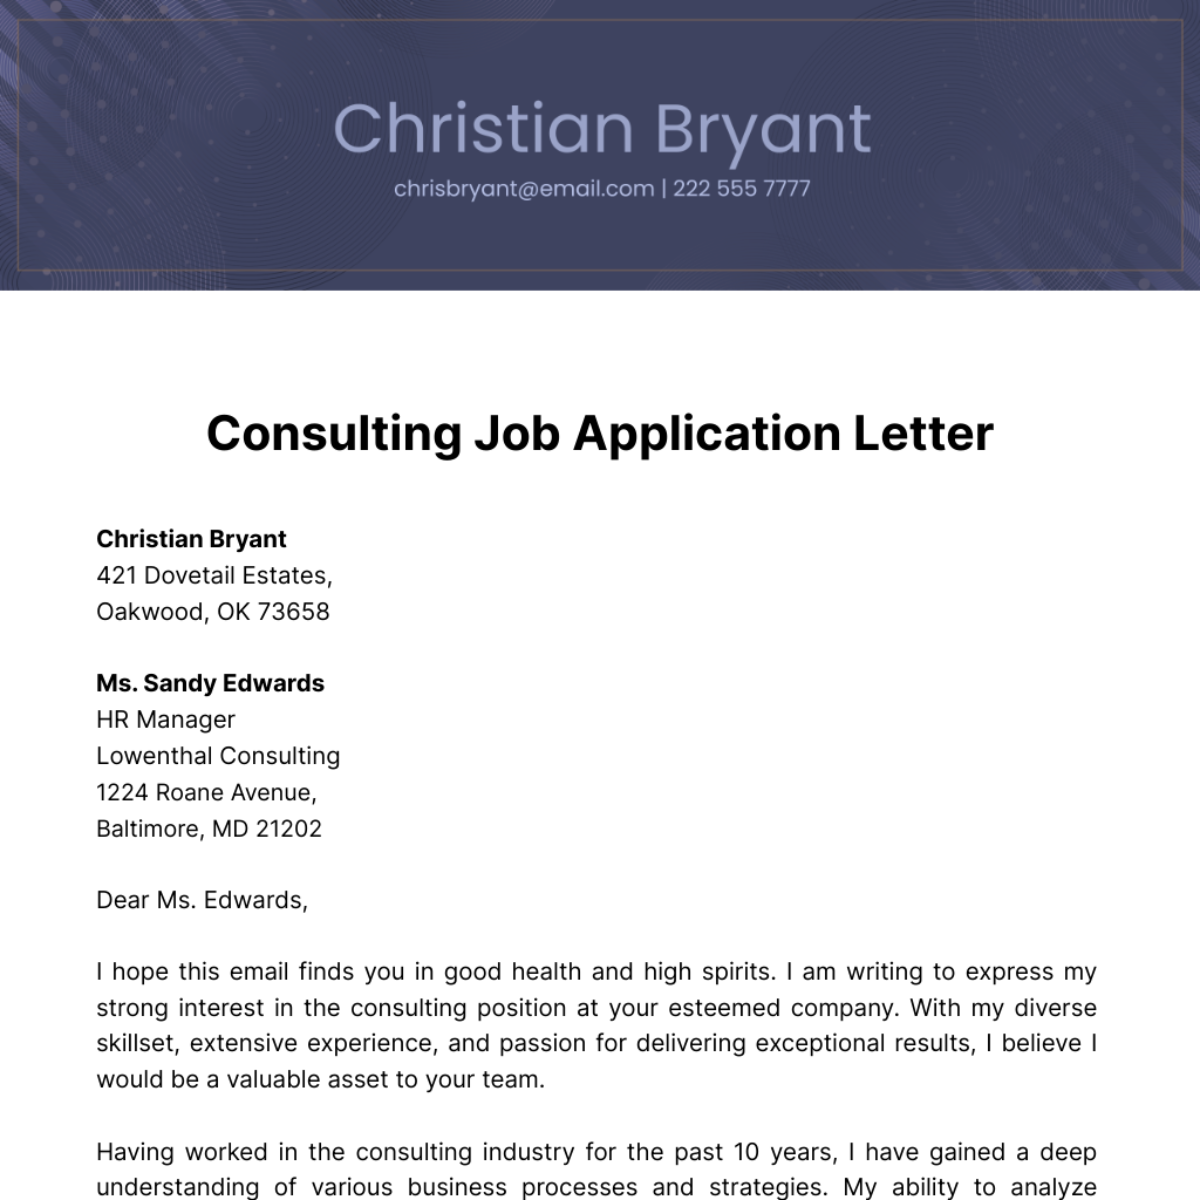 Consulting Job Application Letter  Template